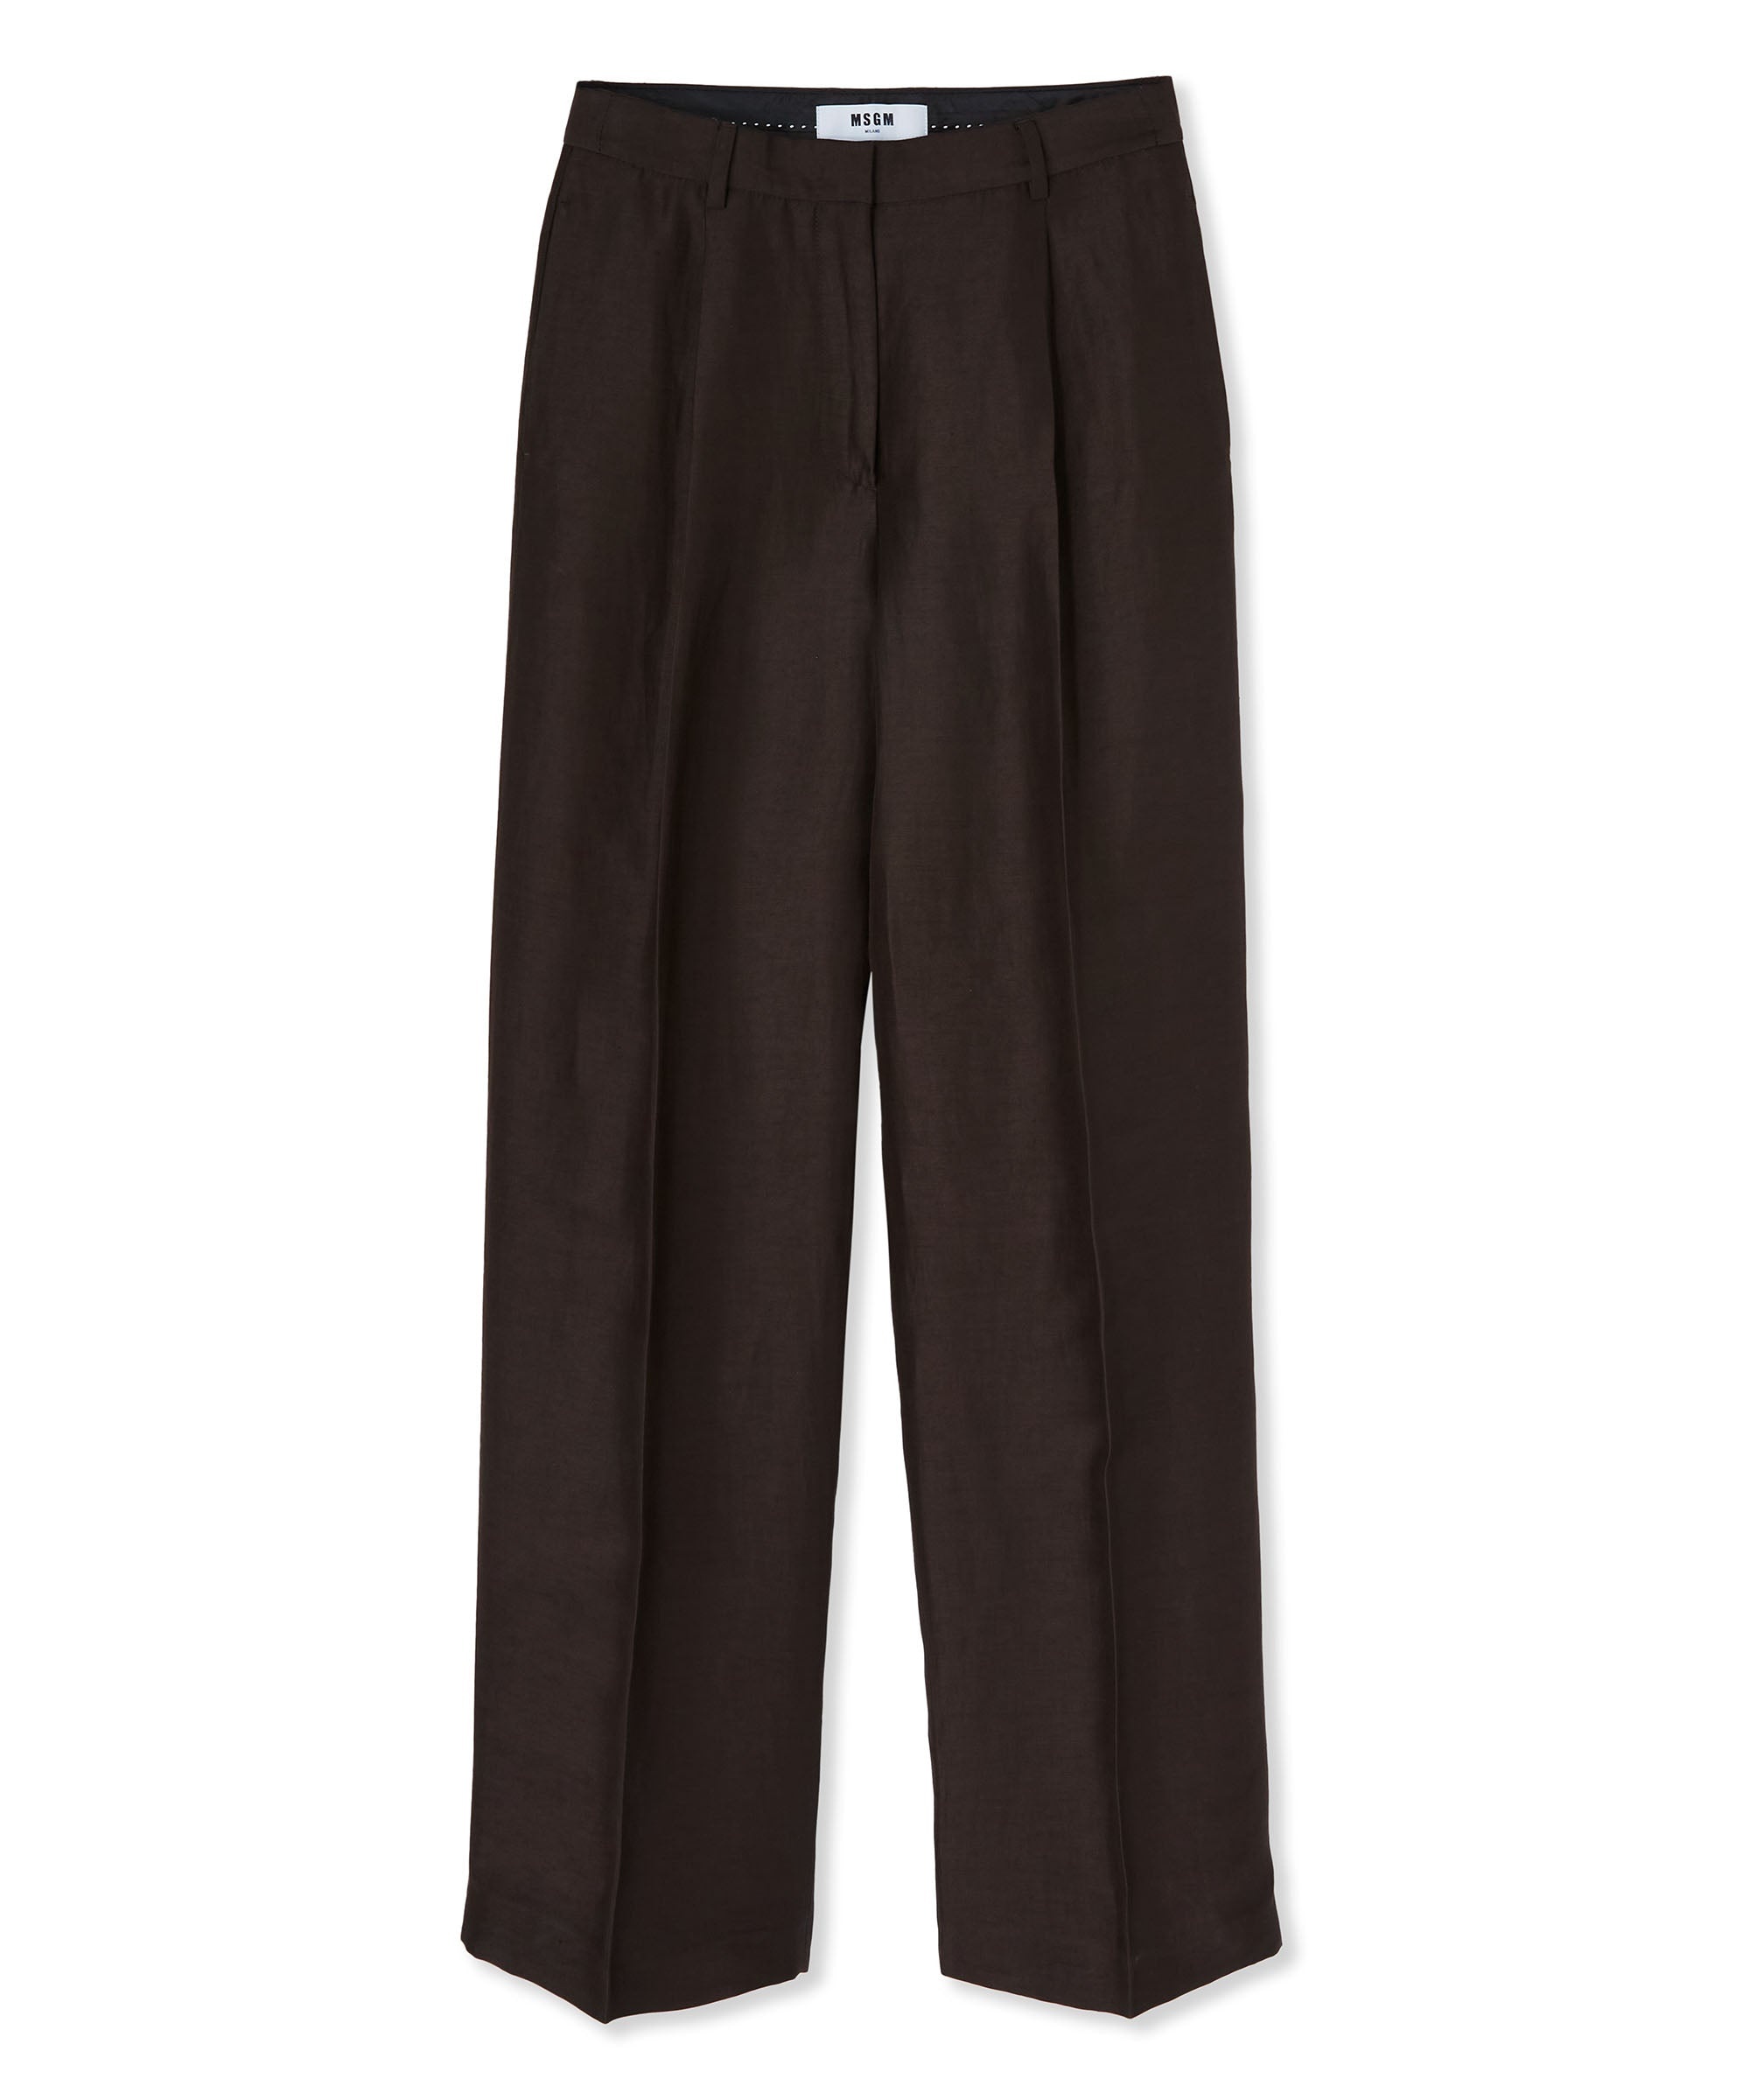 Blended linen and viscose pleated pants - 1